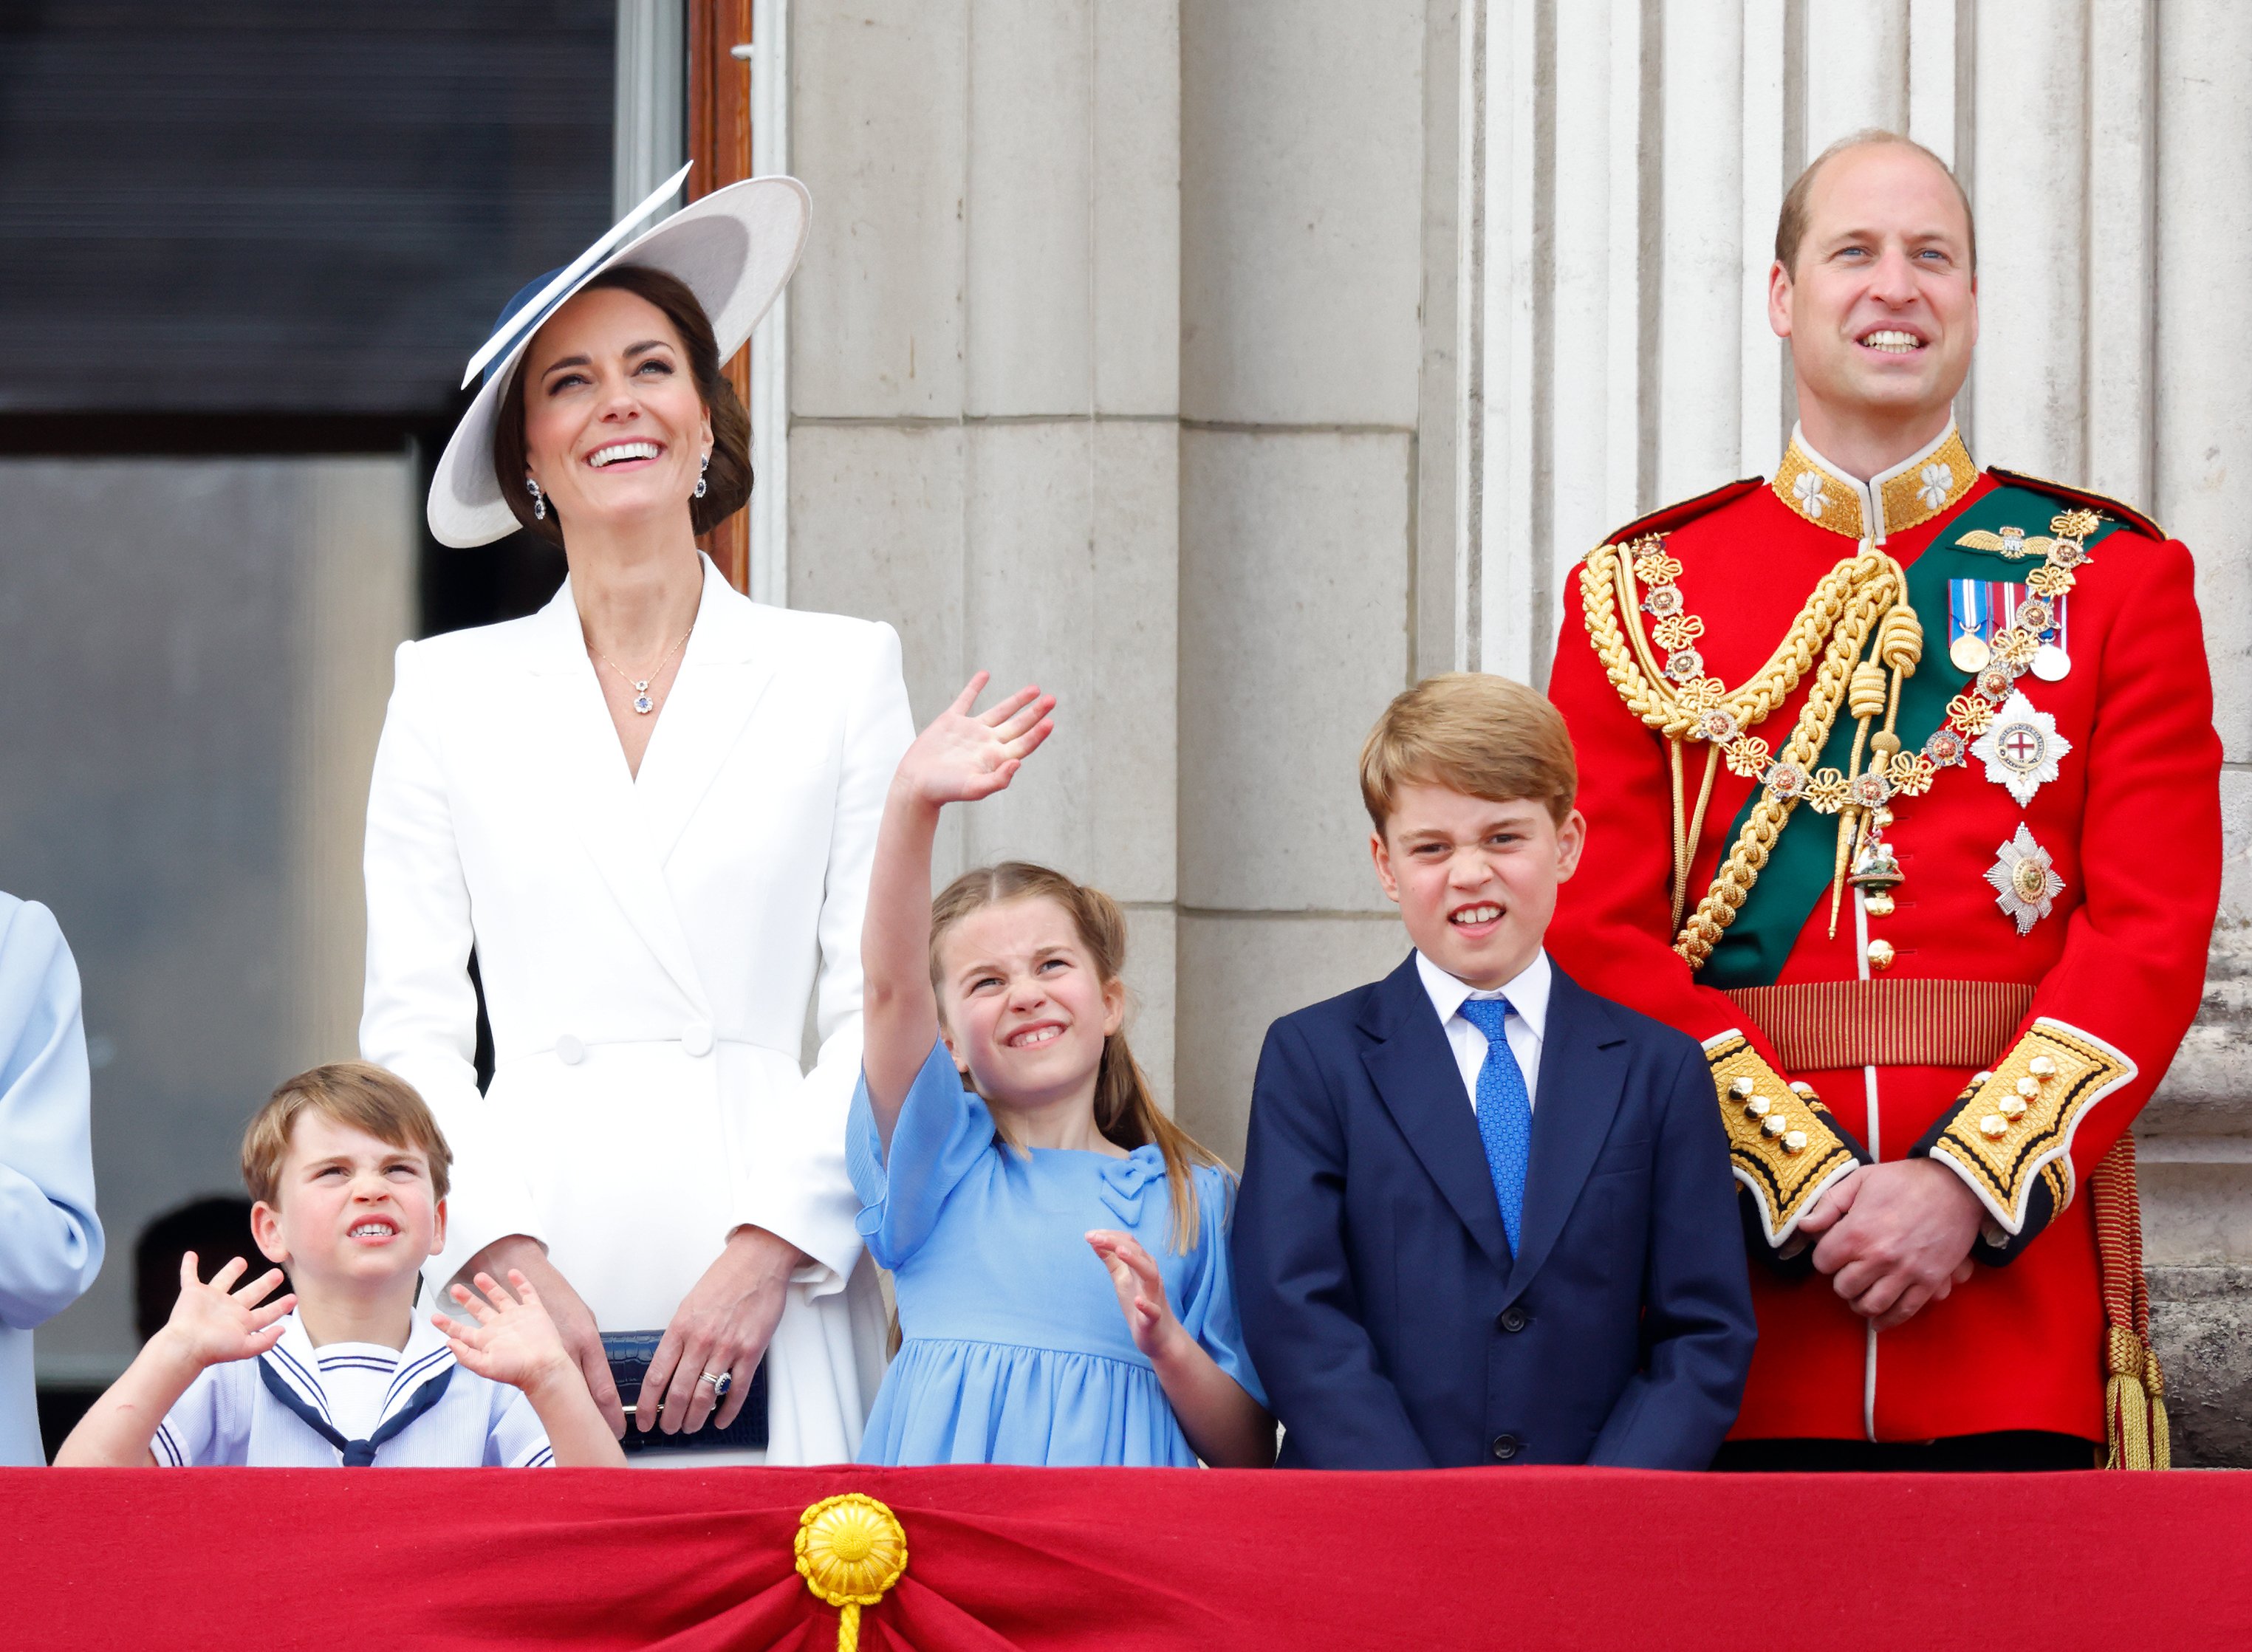 Prince Louis of Cambridge, Catherine, Duchess of Cambridge, Princess Charlotte of Cambridge, Prince George of Cambridge and Prince William, Duke of Cambridge watch a flypast from the balcony of Buckingham Palace during Trooping the Color on June 2, 2022 in London, England | Source: Getty Images